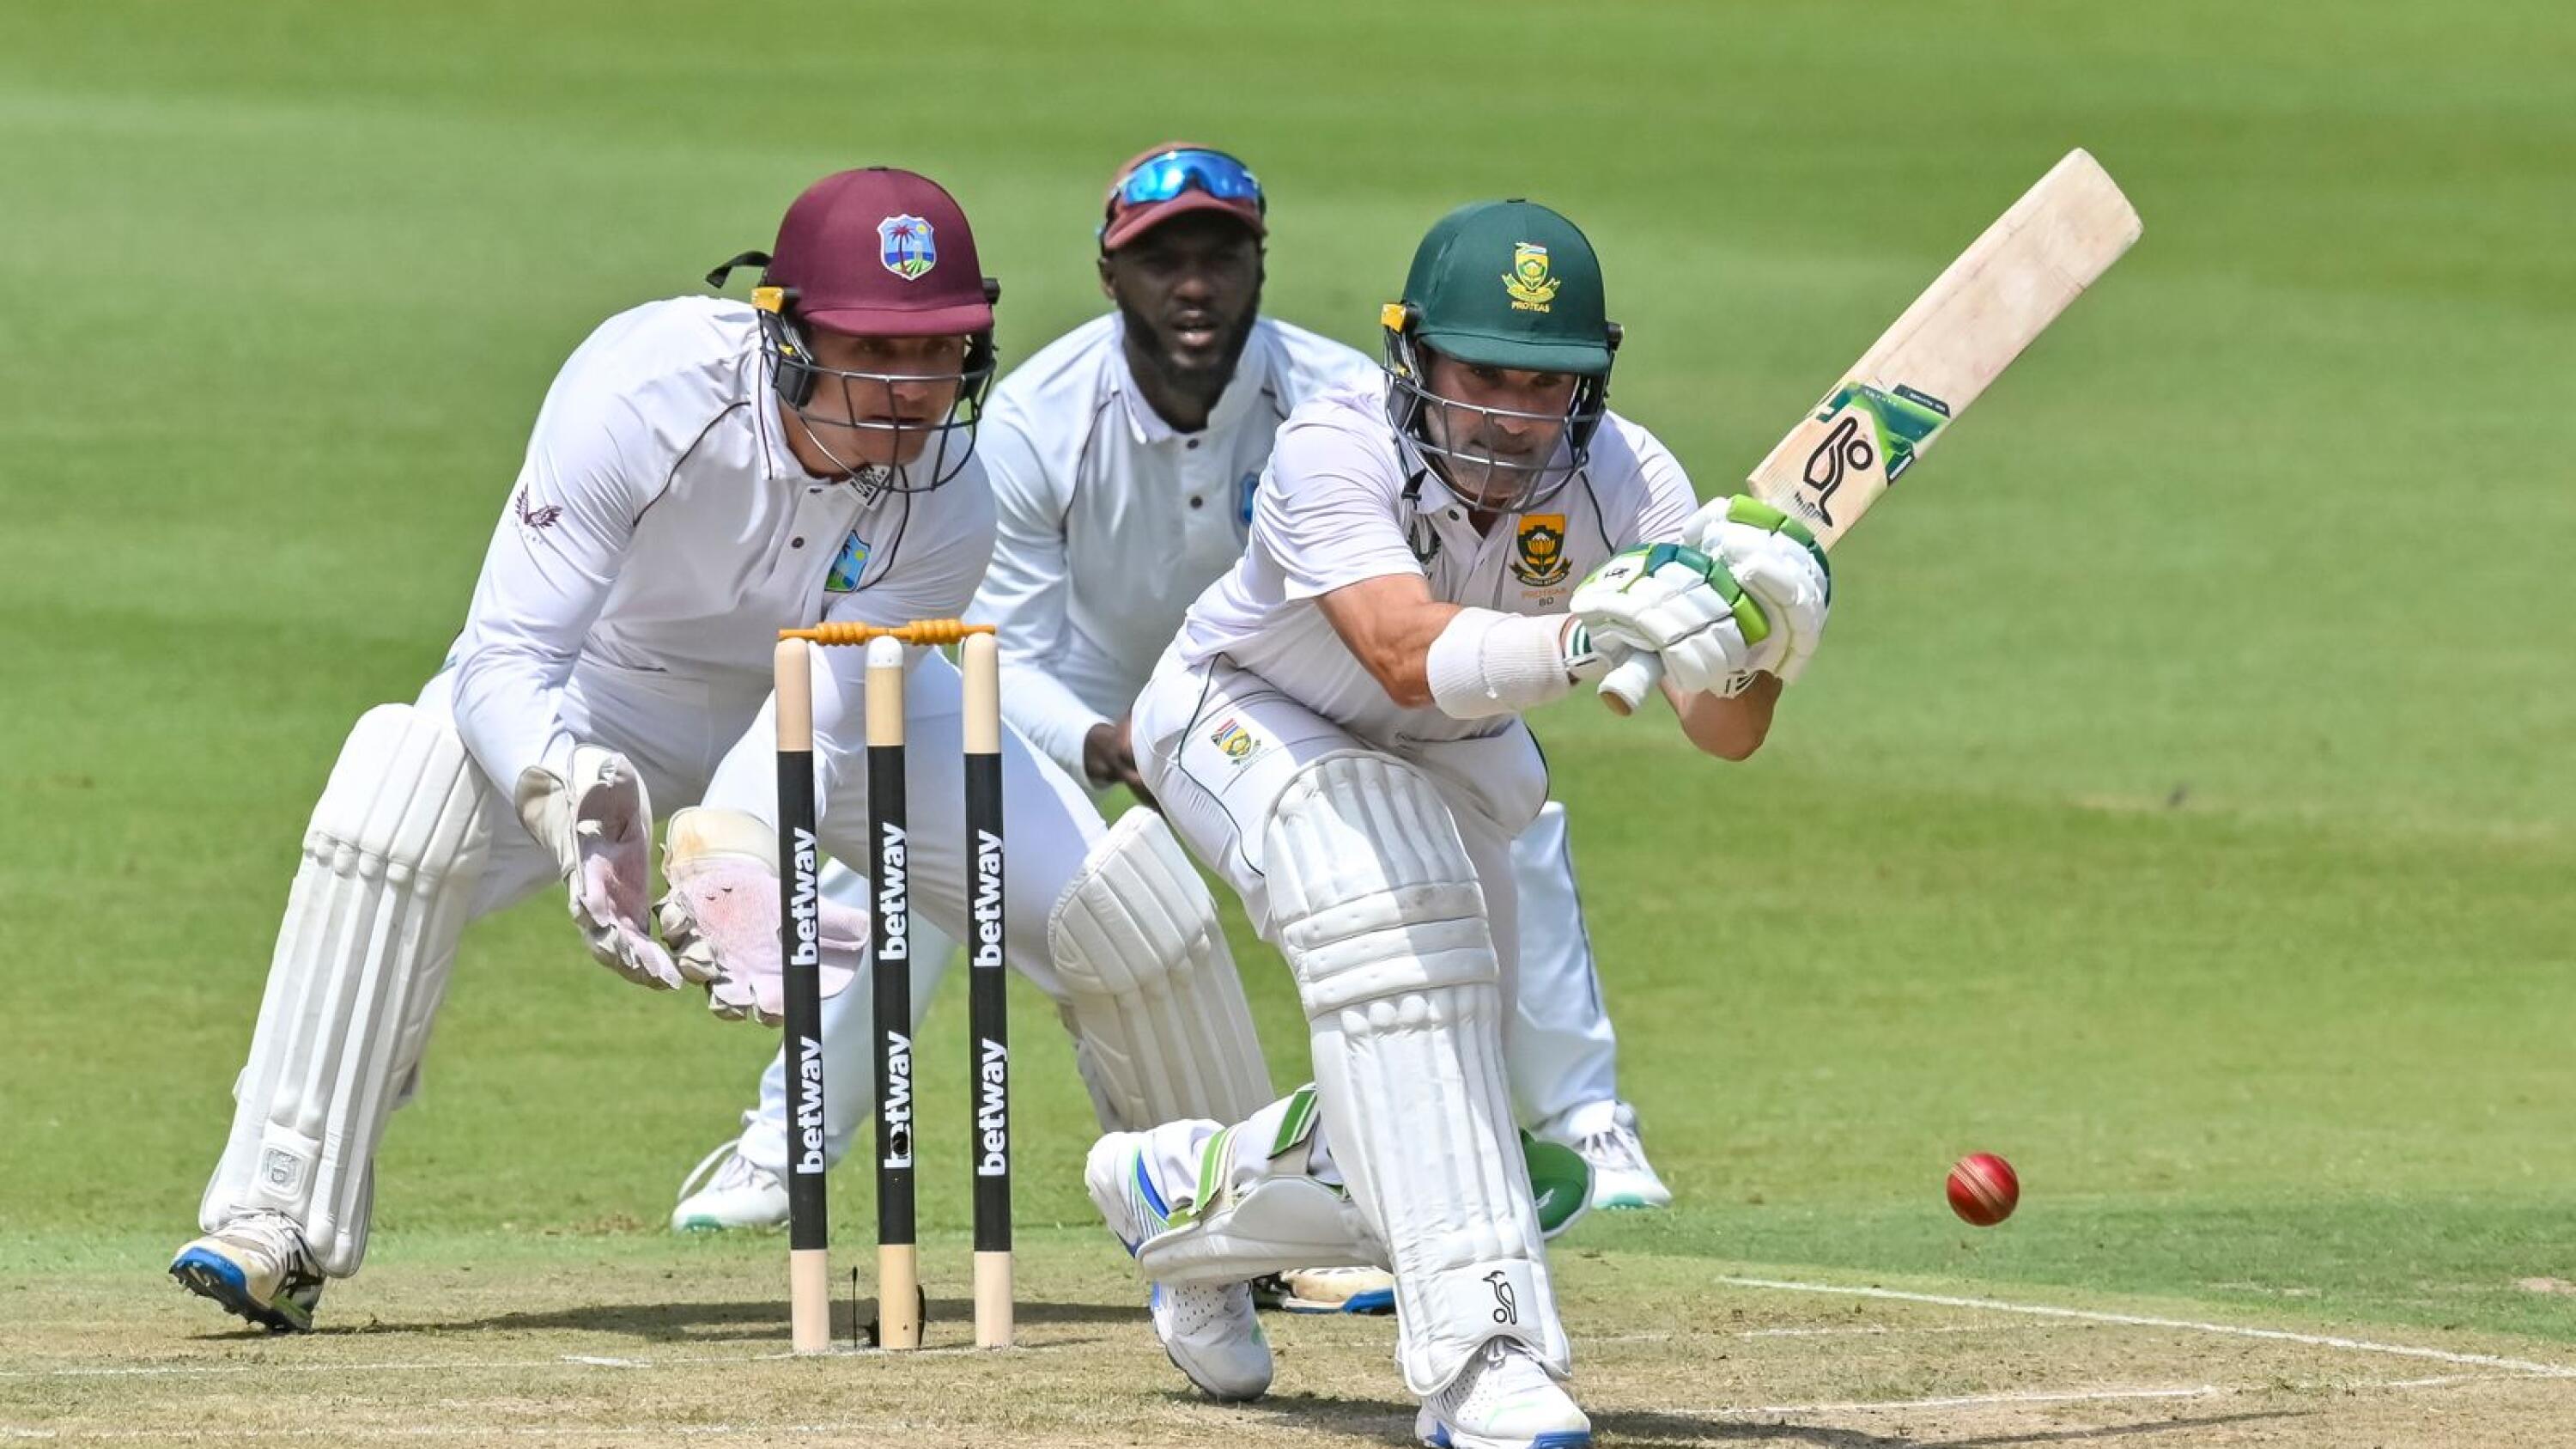 Dean Elgar of South Africa during day 1 of the 2nd Test Match against the West Indies at the Wanderers in Johannesburg